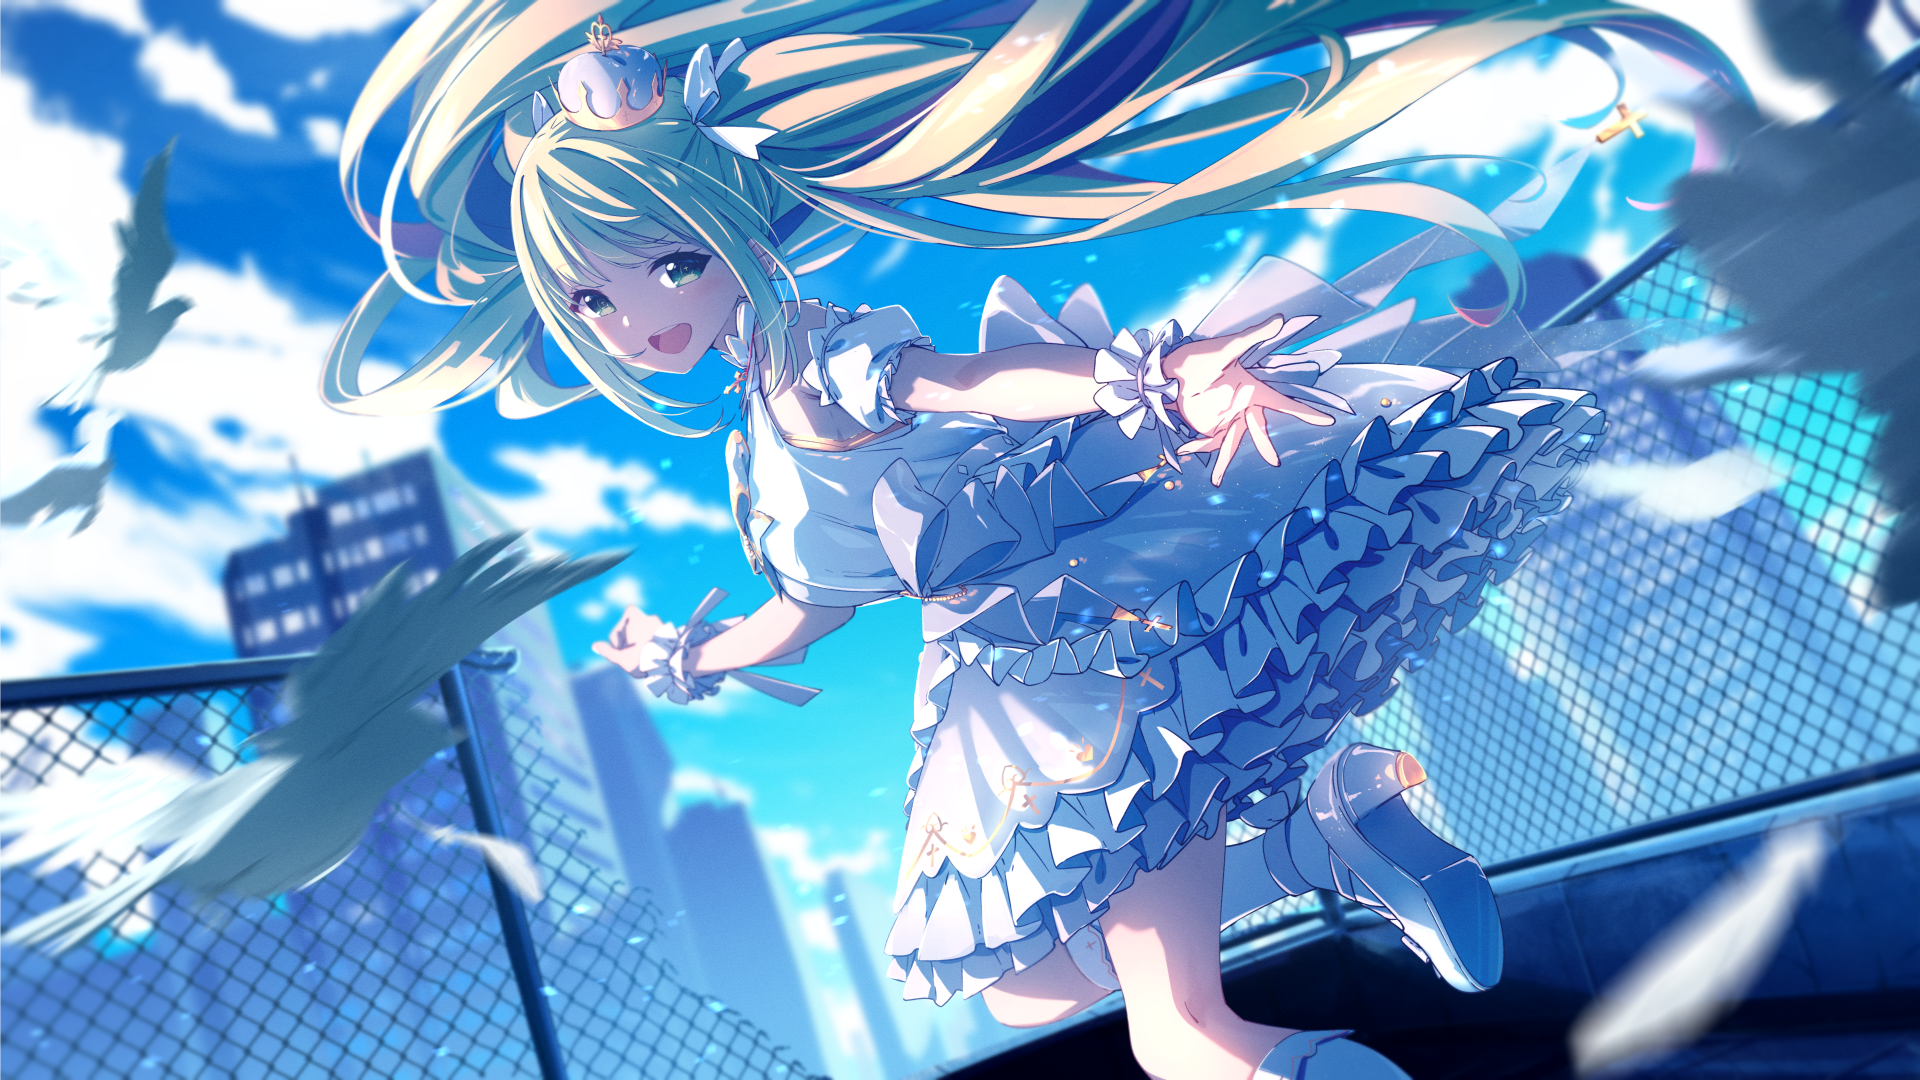 Anime 1920x1080 anime anime girls dress birds fence feathers arms reaching looking at viewer long hair crown heels sky clouds building